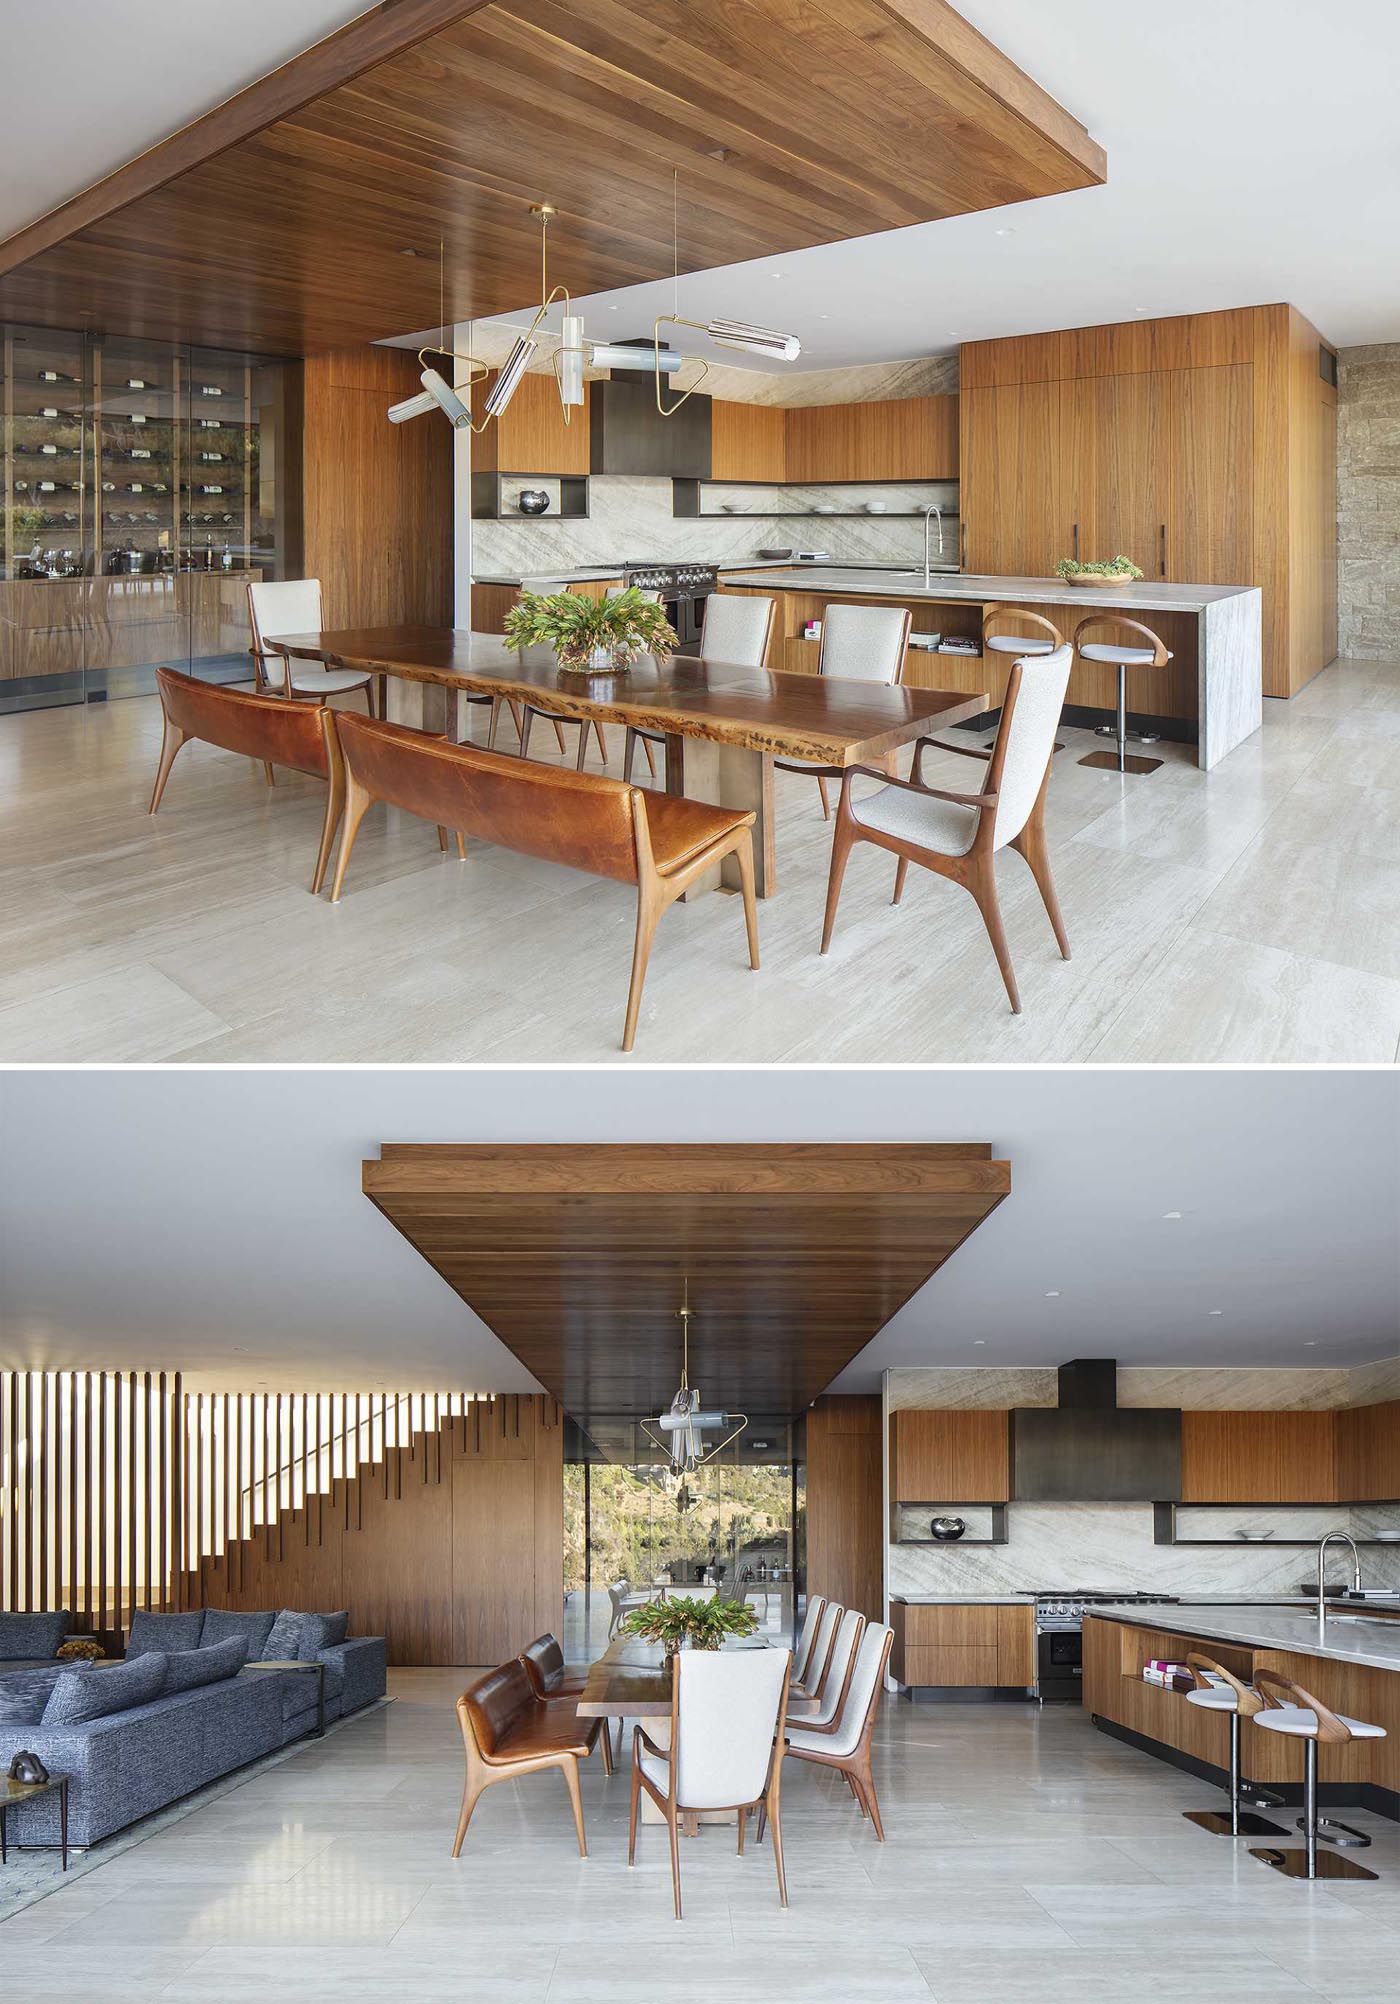 This modern open plan dining area is  defined by a wood ceiling accent and the large complementing live edge wood table.